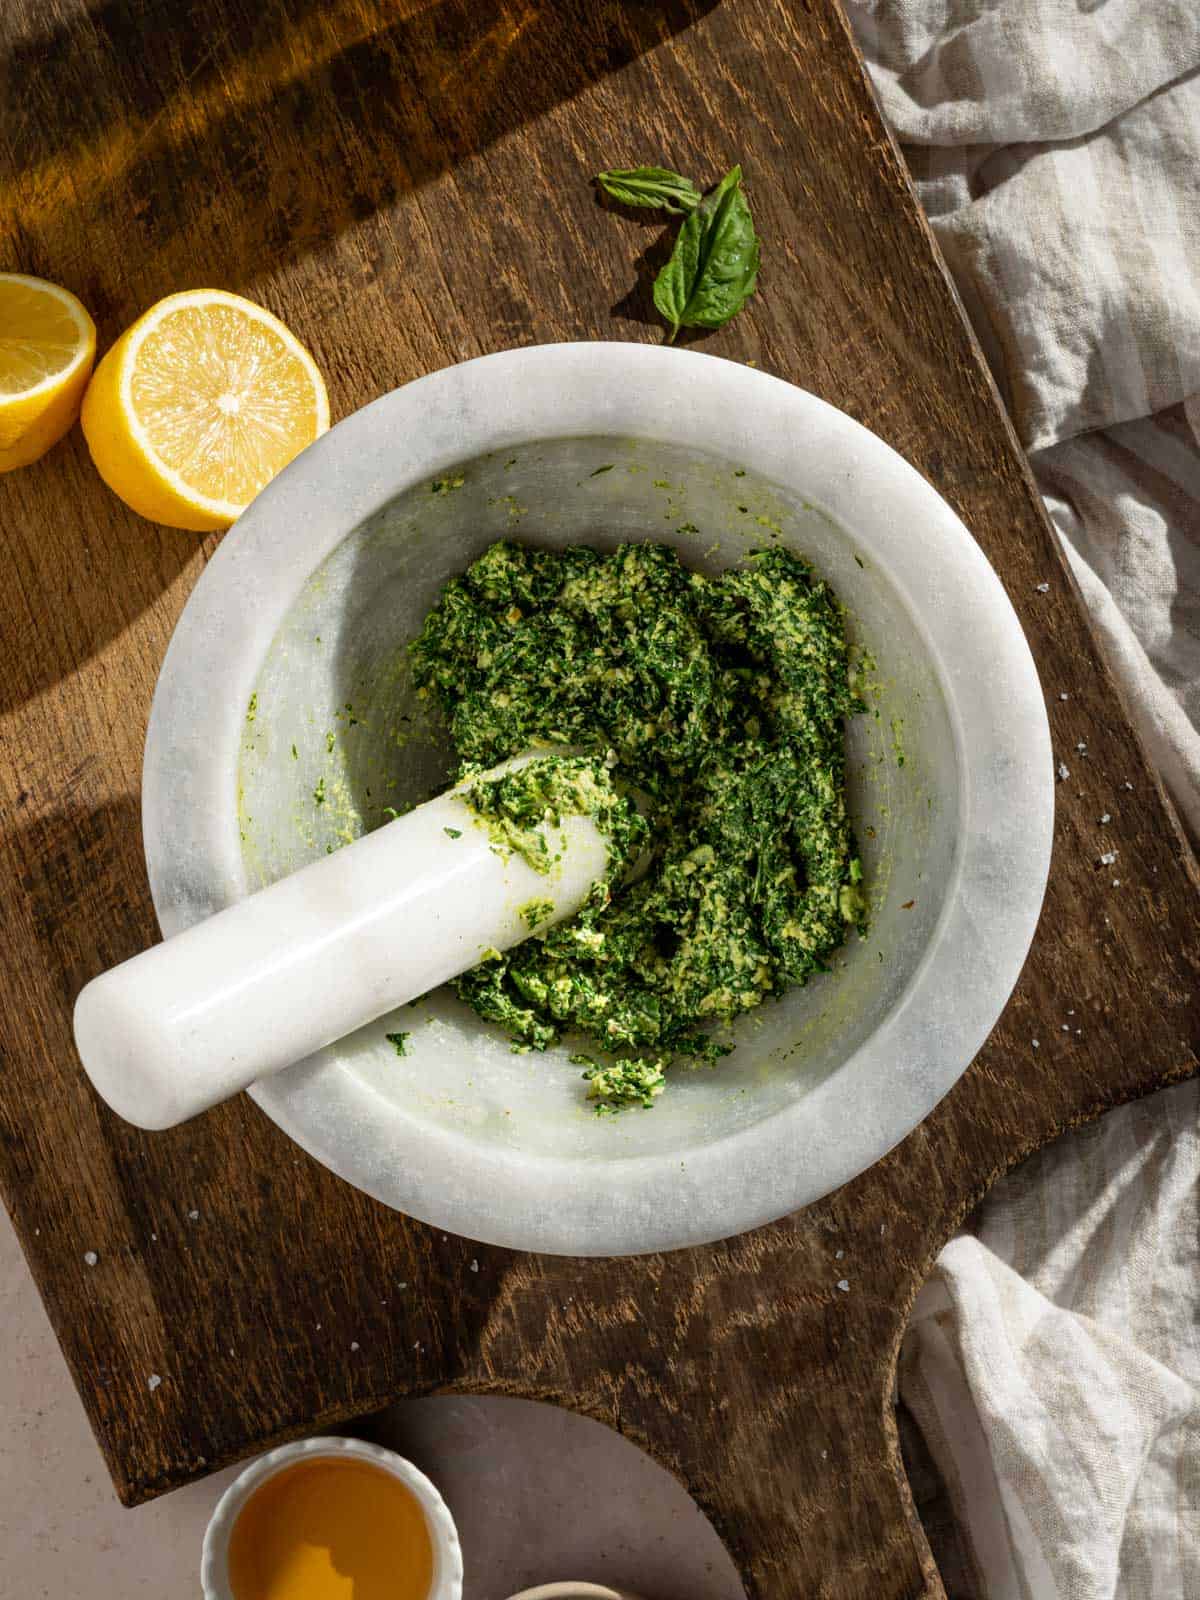 Mashed garlic, pine nuts, and basil in a large mortar.